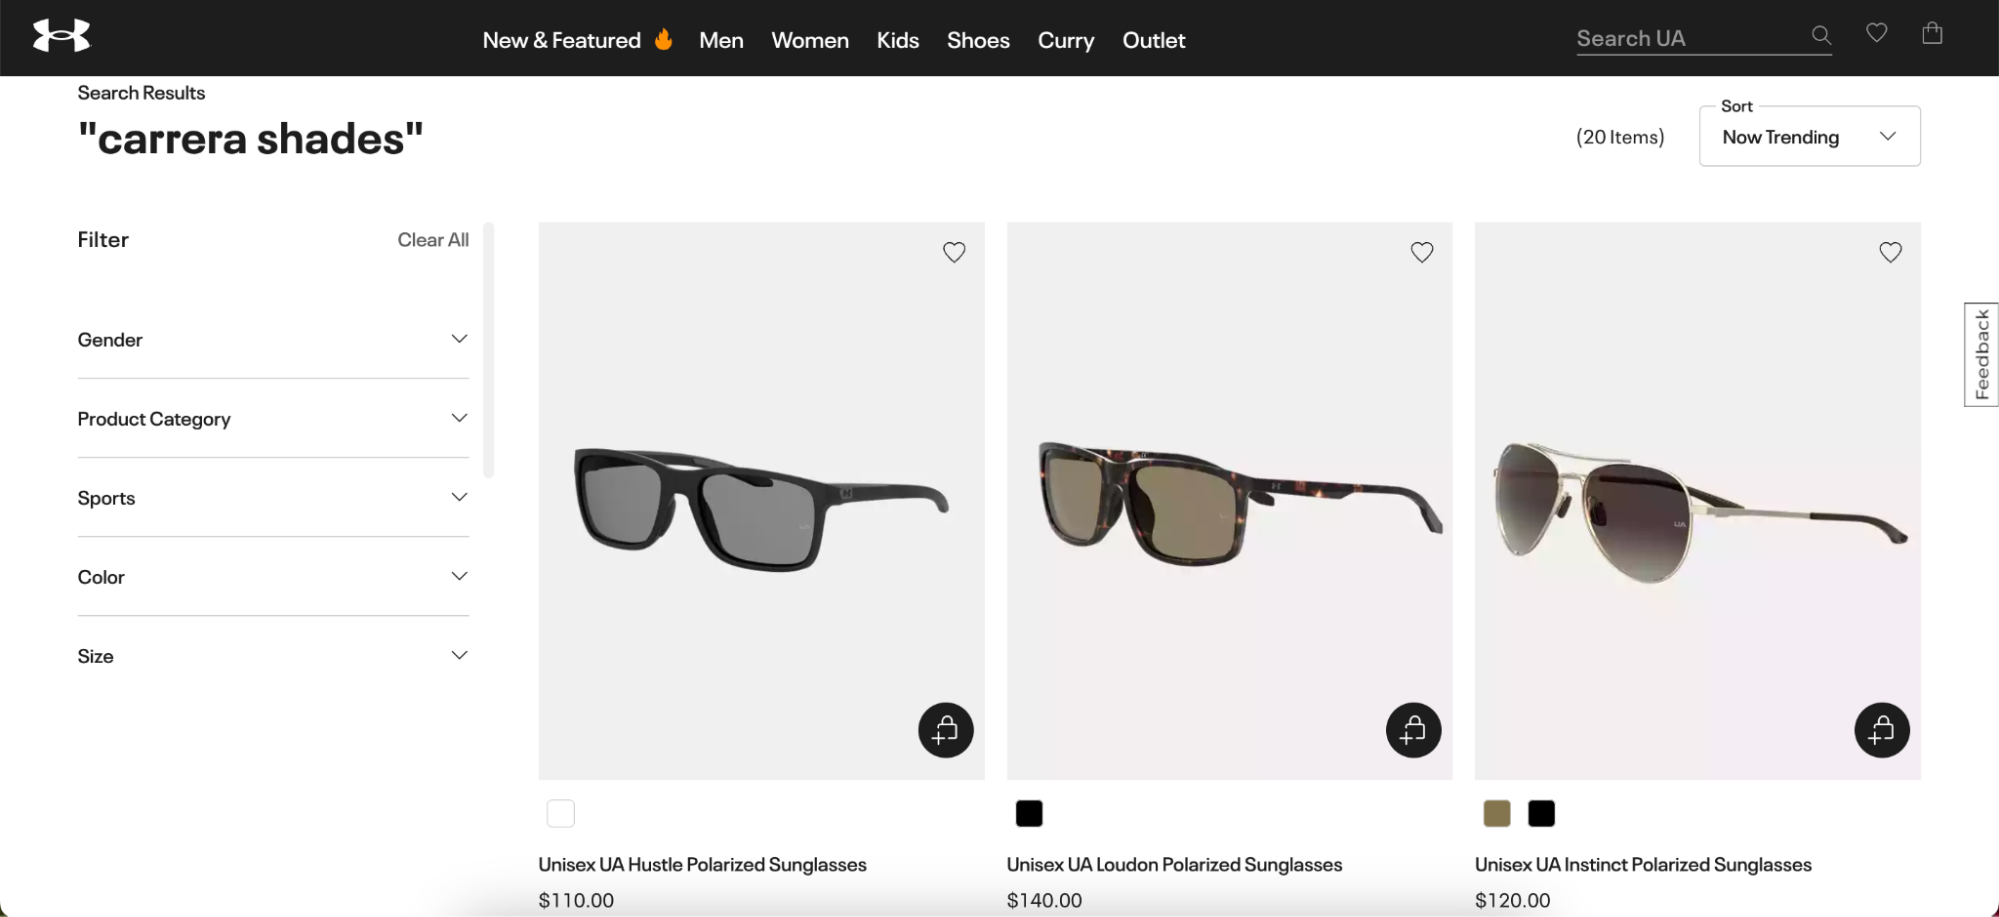 A screenshot of a search for "Carrera shades" on the Under Armour website, showing results with Under Armour sunglasses